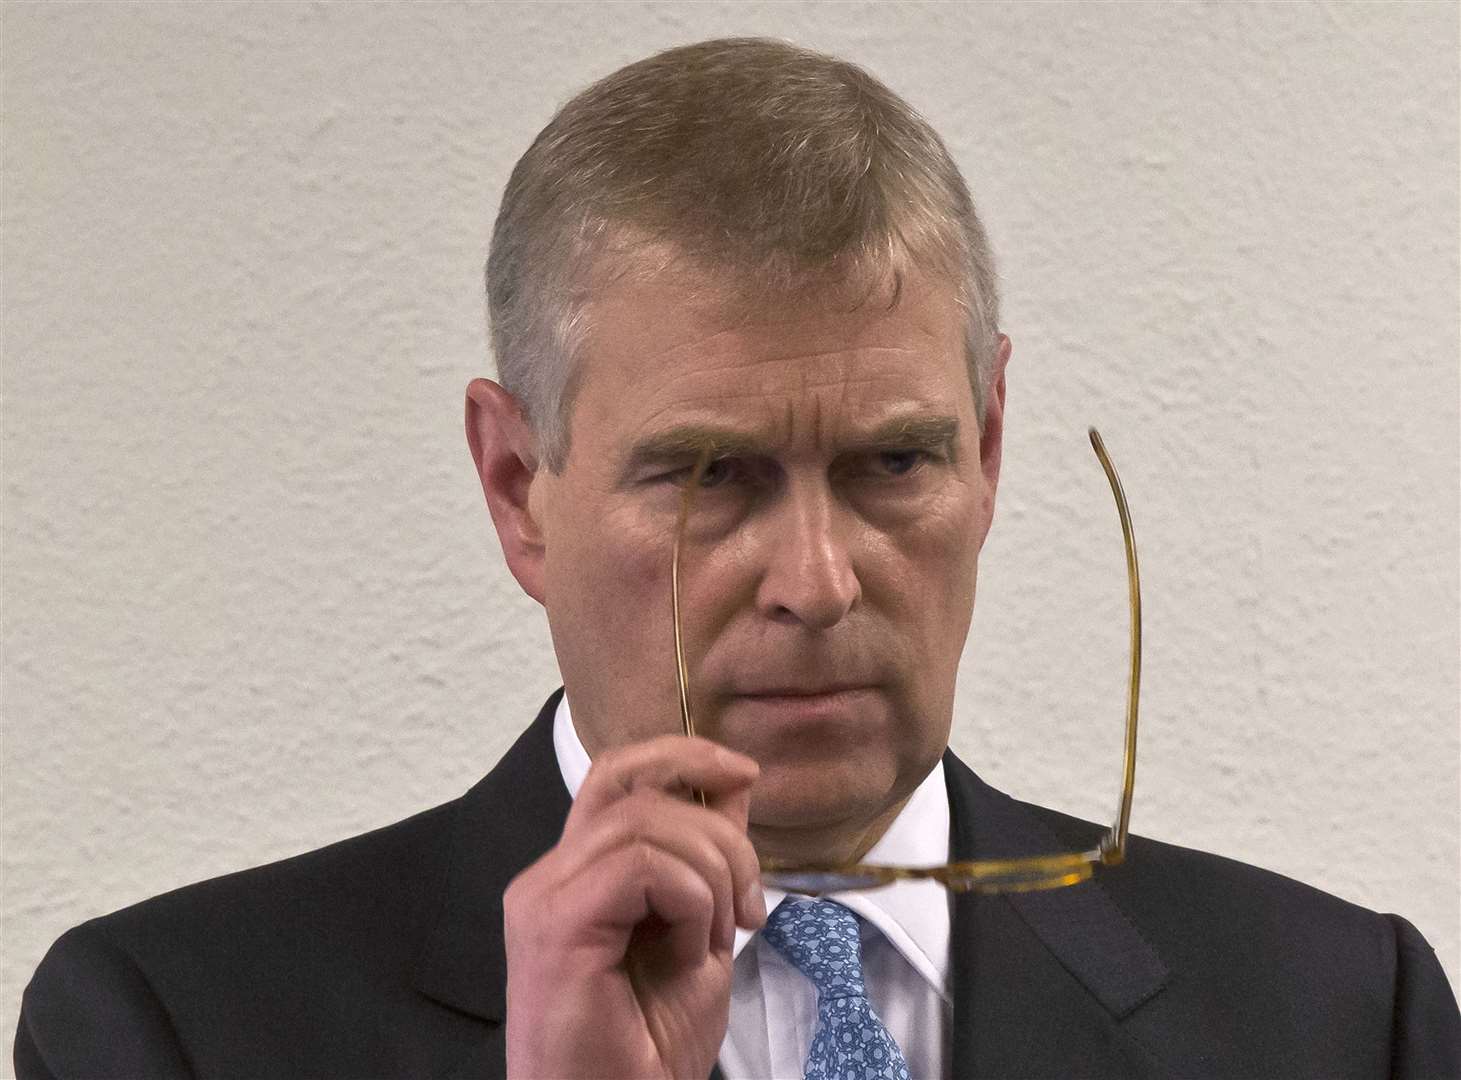 The Duke of York stepped down from public life following the fallout from his friendship with Jeffrey Epstein (PA)